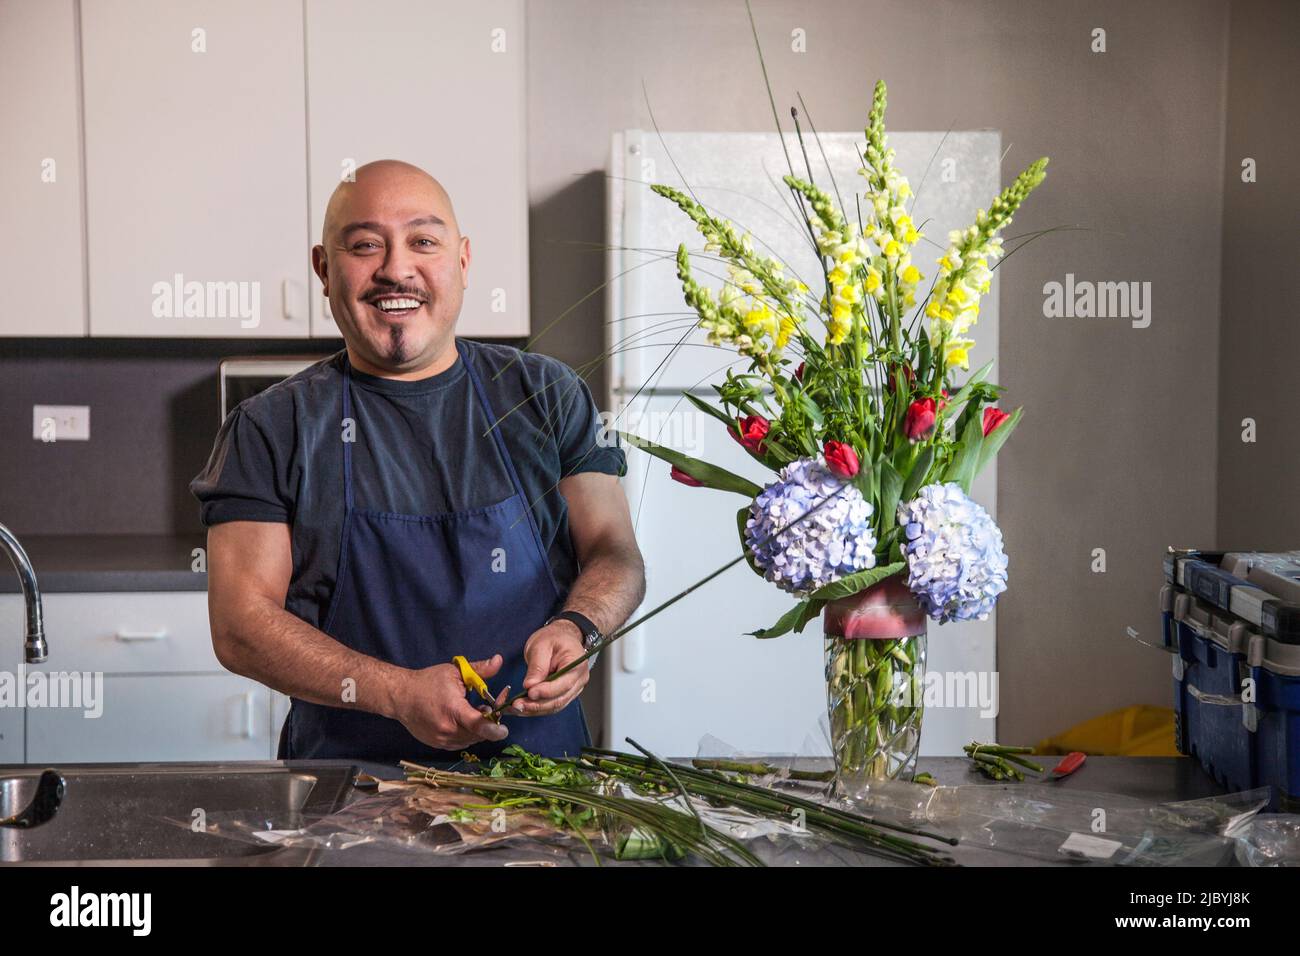 Smiling man arranging flowers in kitchen Stock Photo